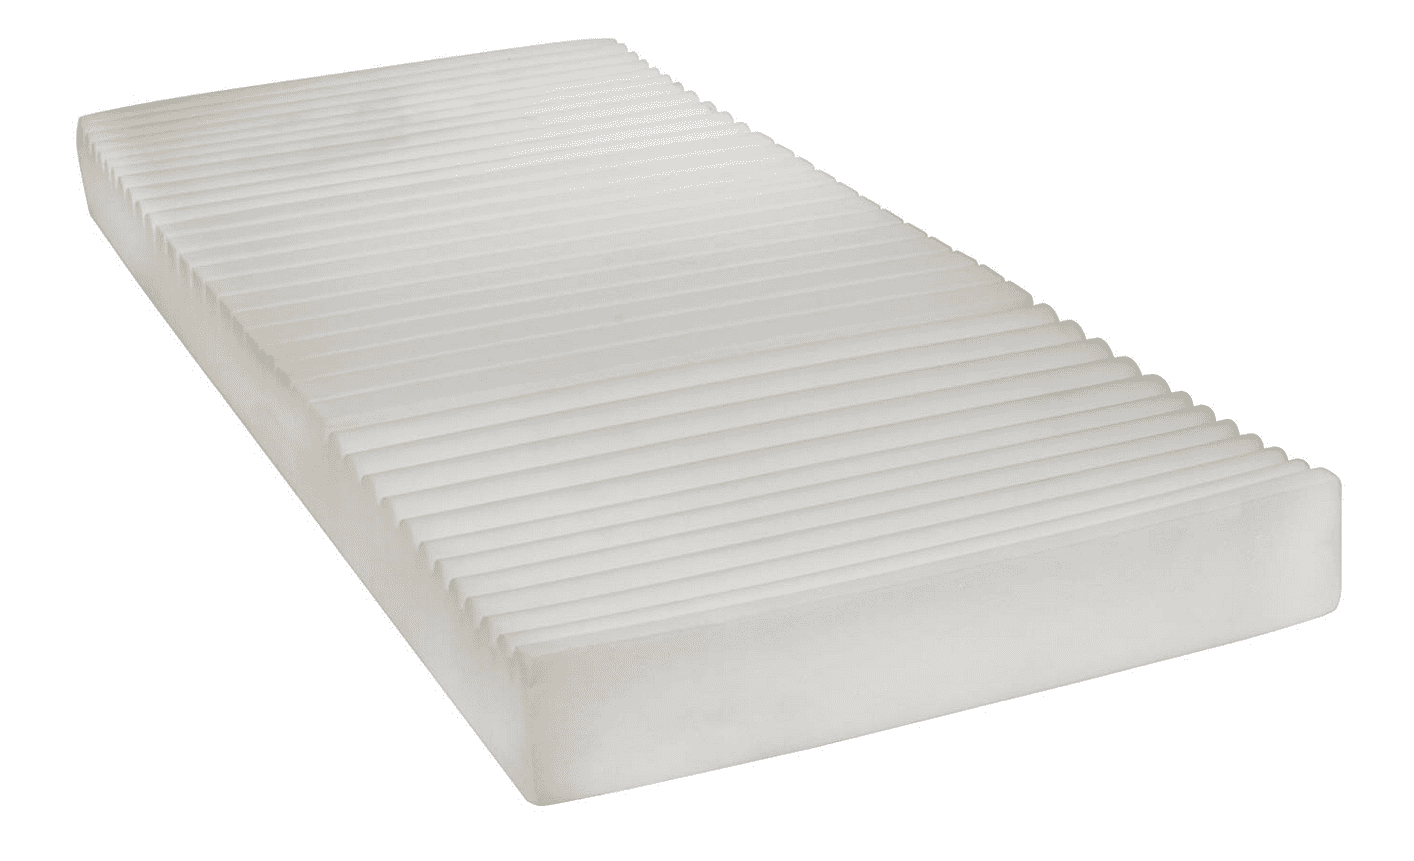 therapeutic everest mattress reviews